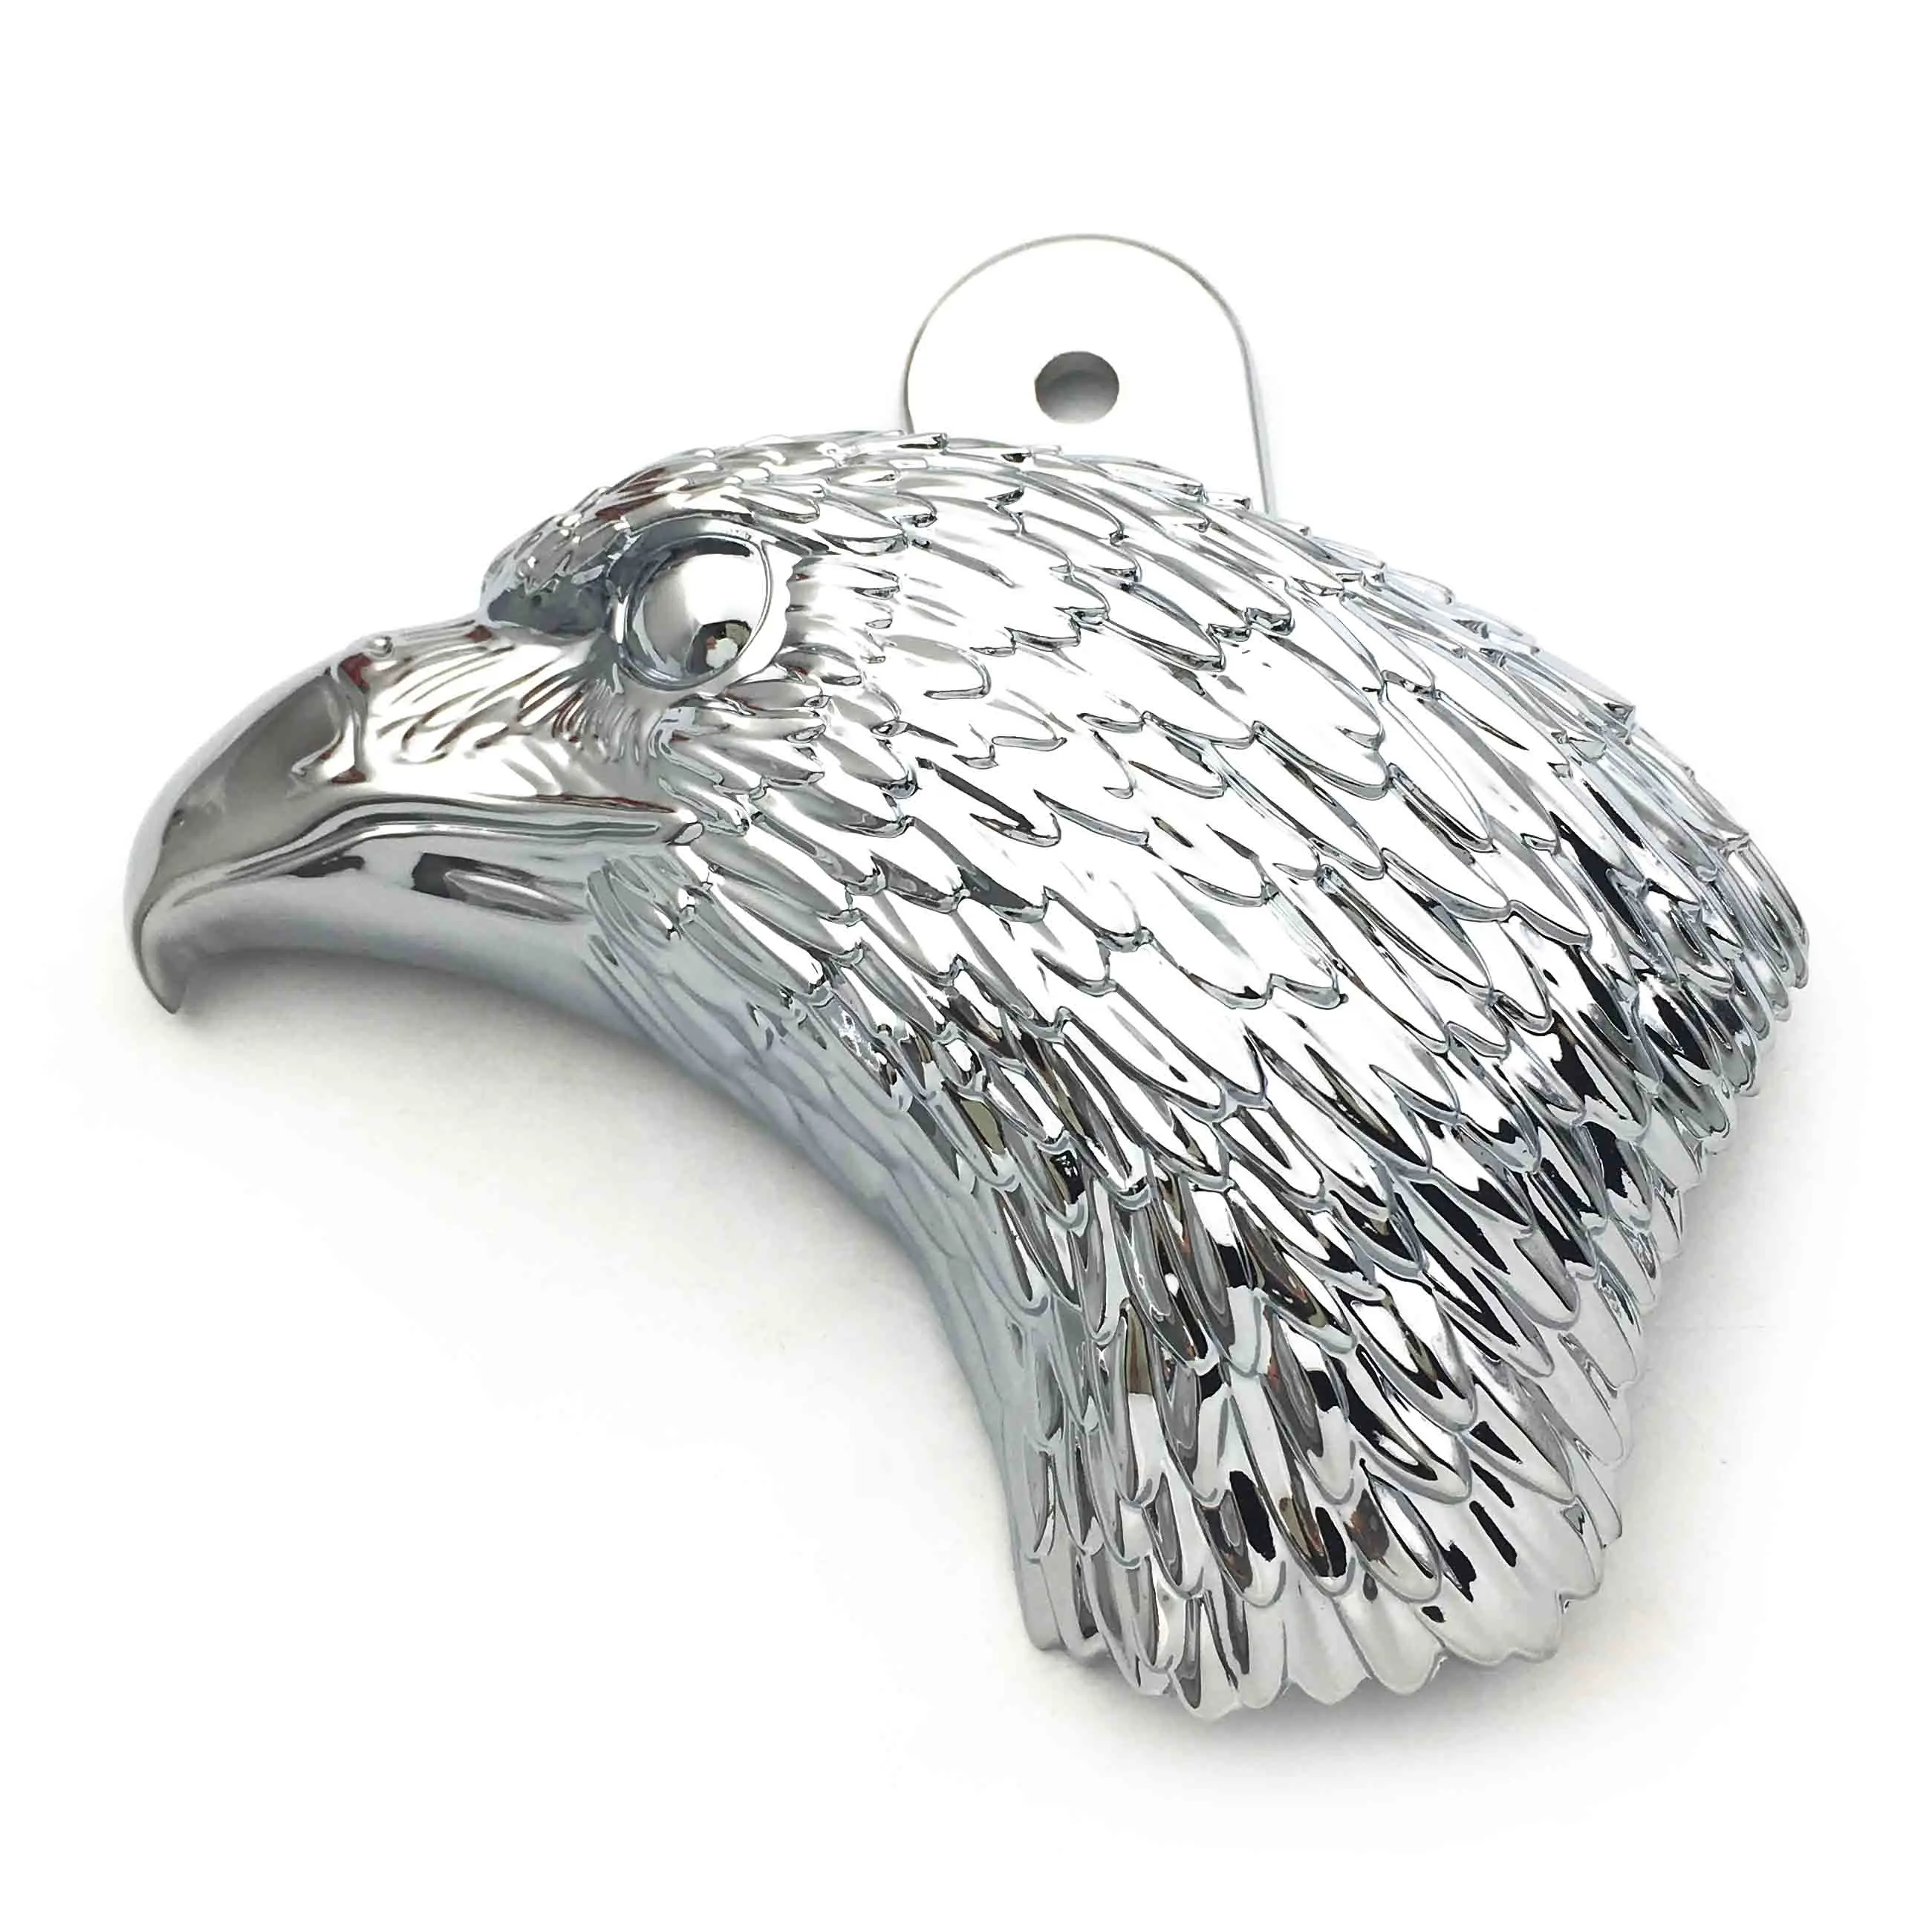 

Eagle Head Horn Cover for Harley Davidson Big Twins V-Rods Stock Cowbell 1992-2016 CHROME Aftermarket Motorcycle Parts